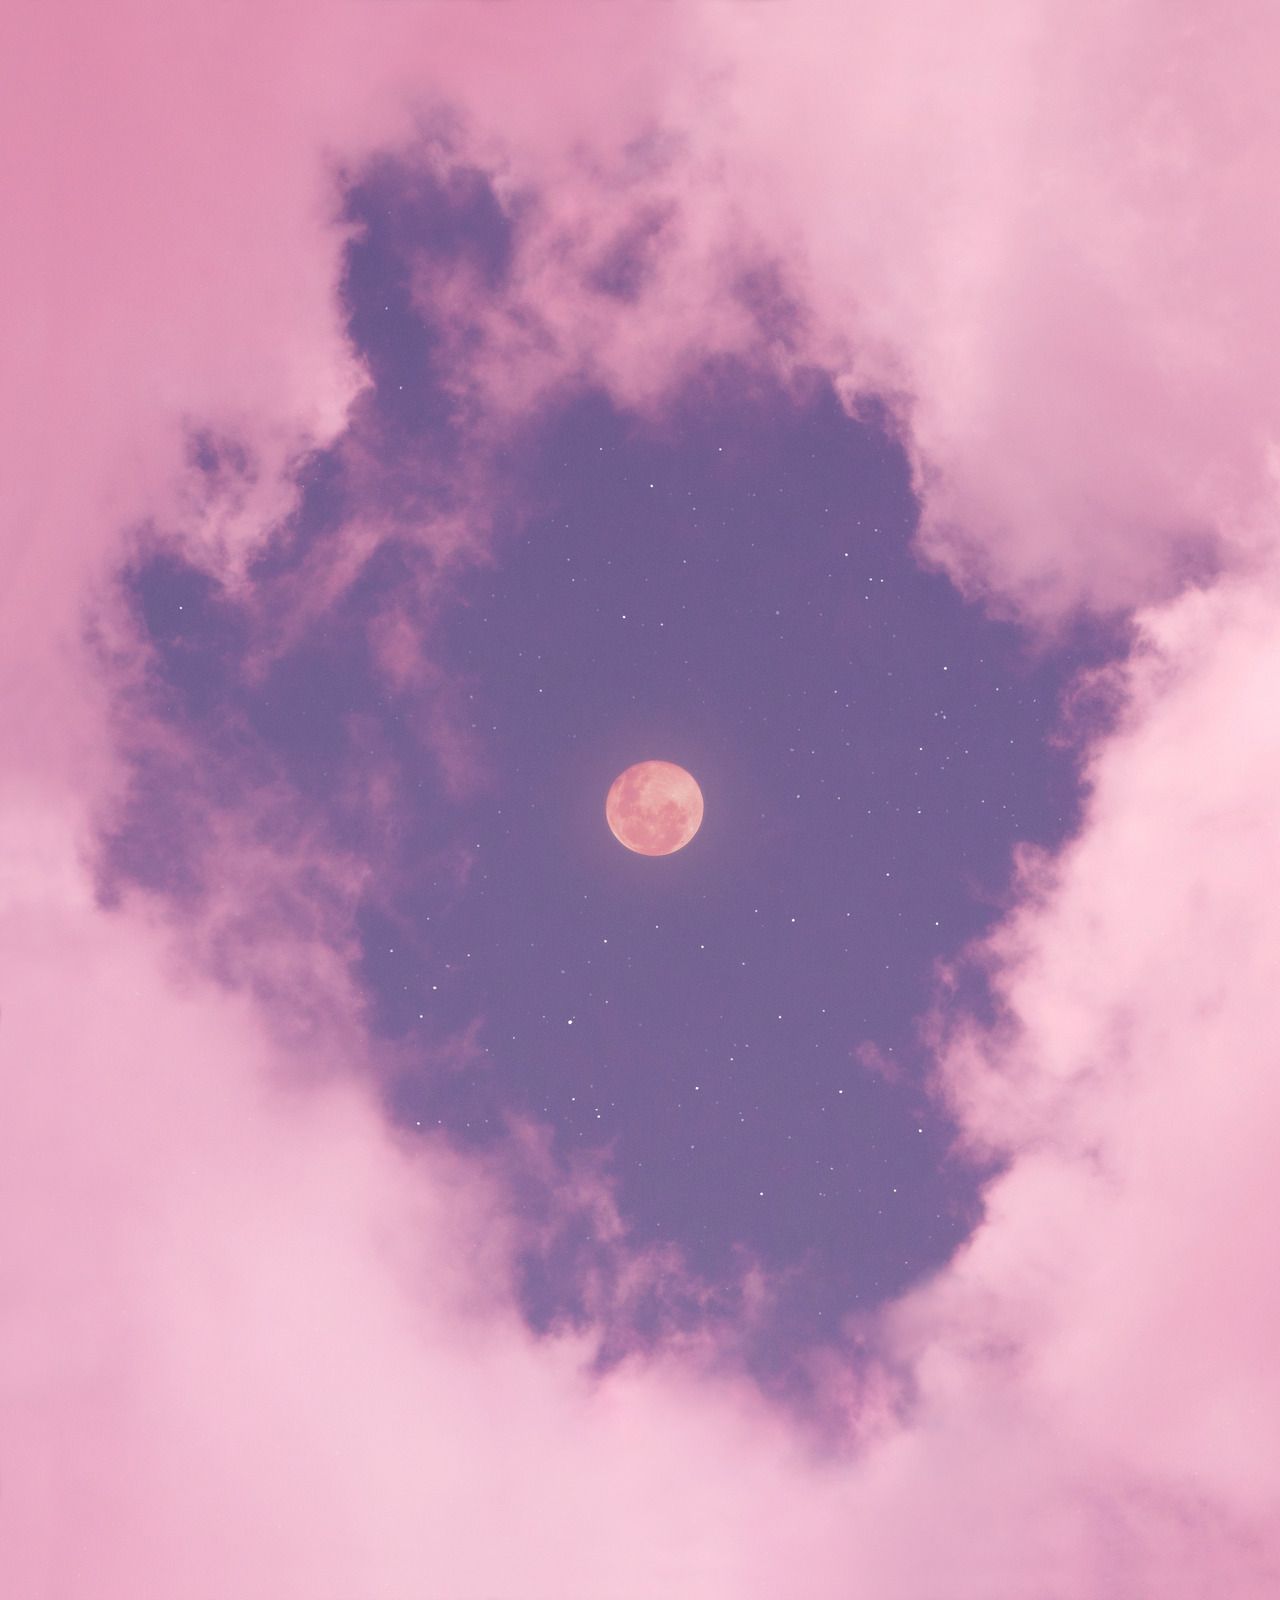 A full moon surrounded by clouds - Vintage clouds, Cupid